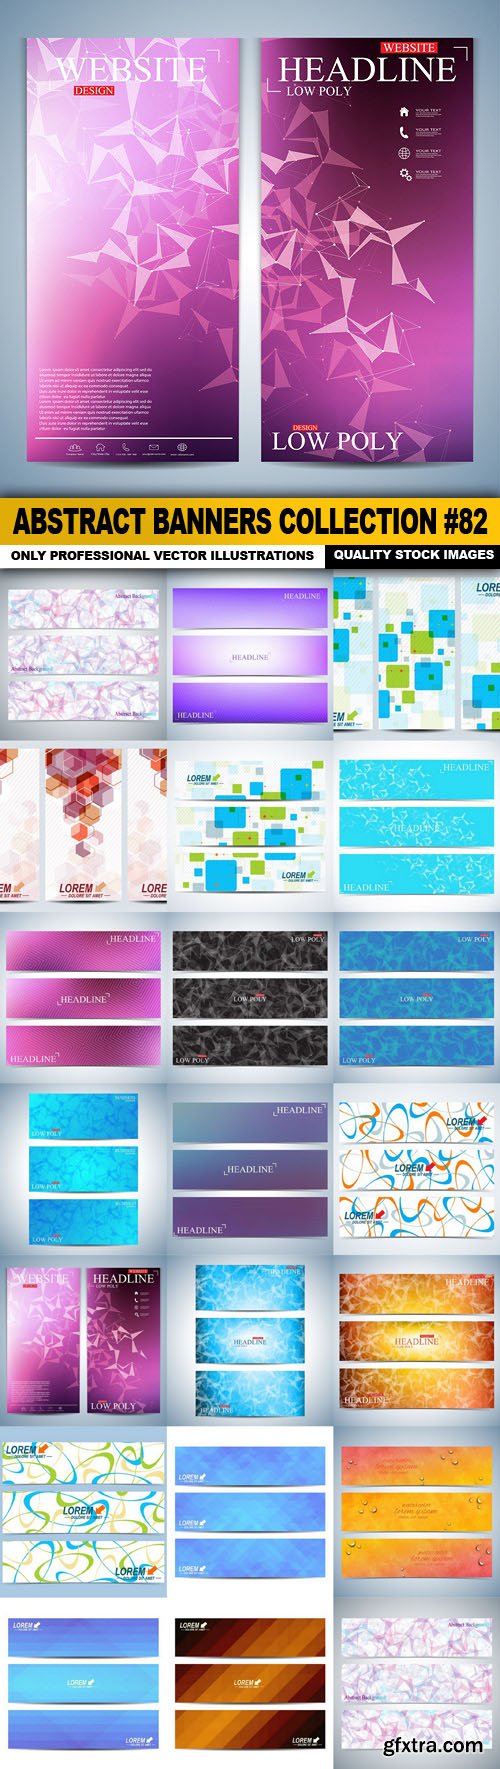 Abstract Banners Collection #82 - 20 Vectors